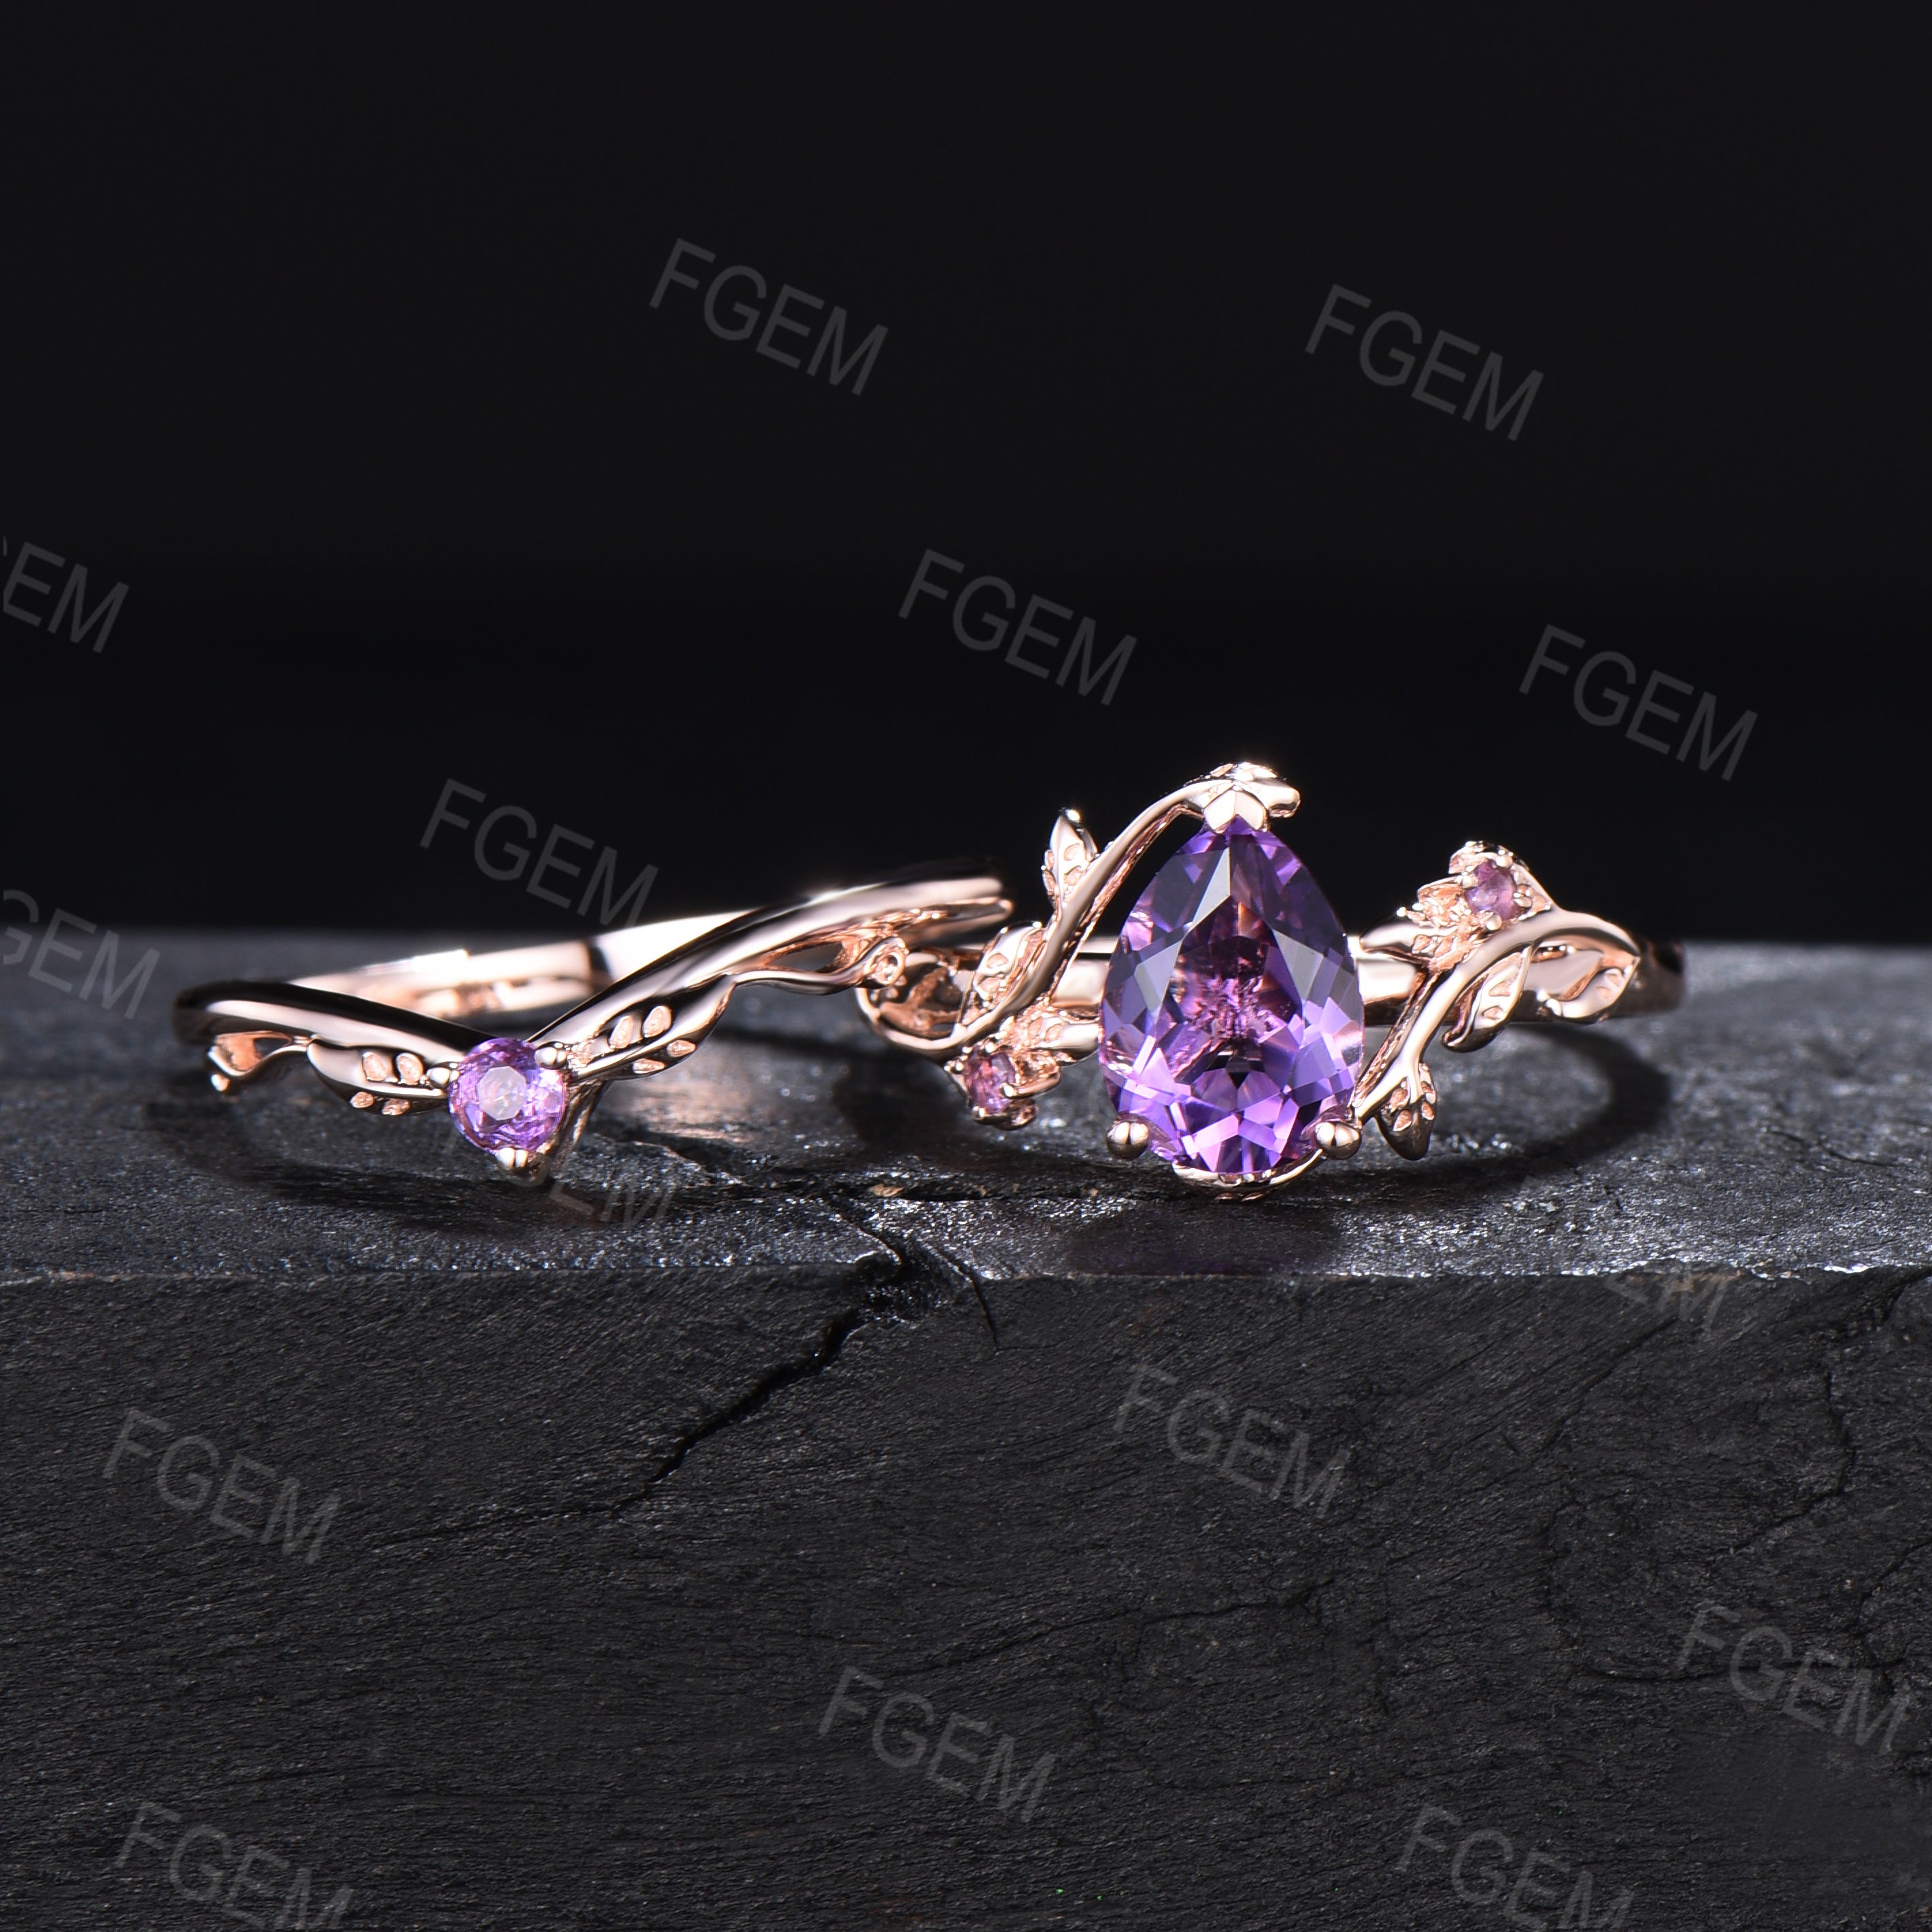 Etah Love | Sterling Silver Jewelry | Bewitched Amethyst Ring